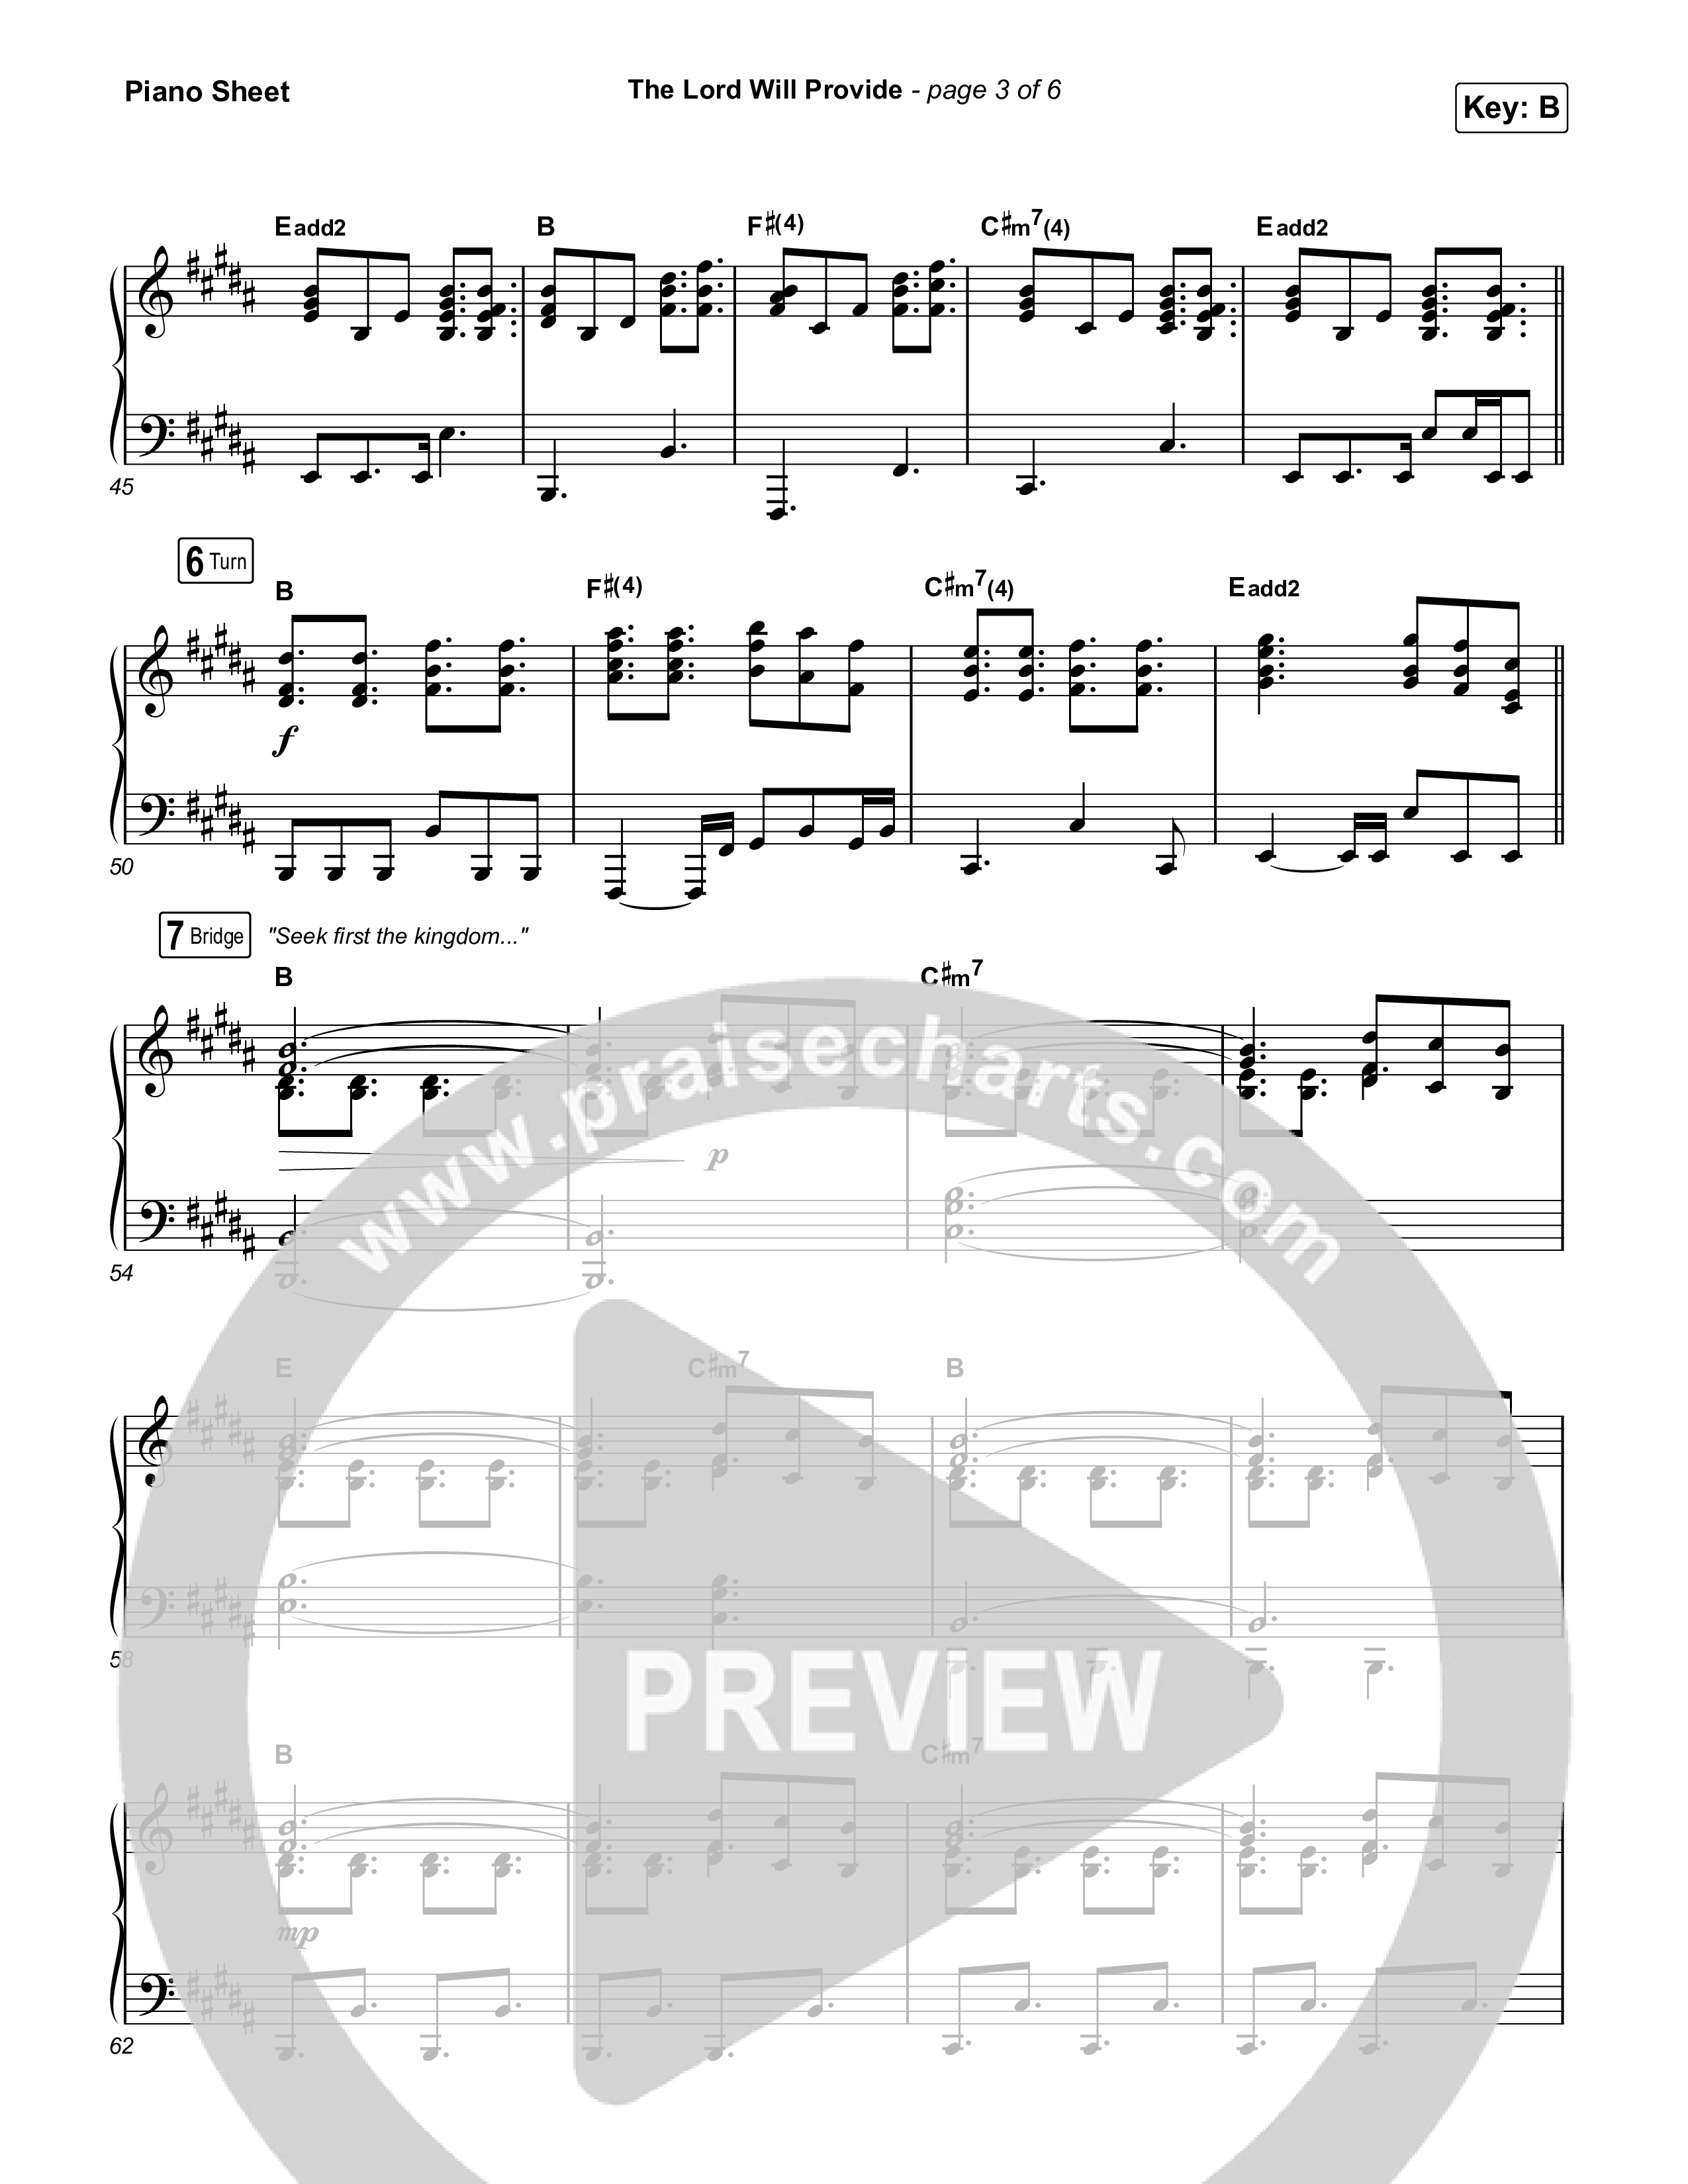 The Lord Will Provide Piano Sheet (Passion / Landon Wolfe)